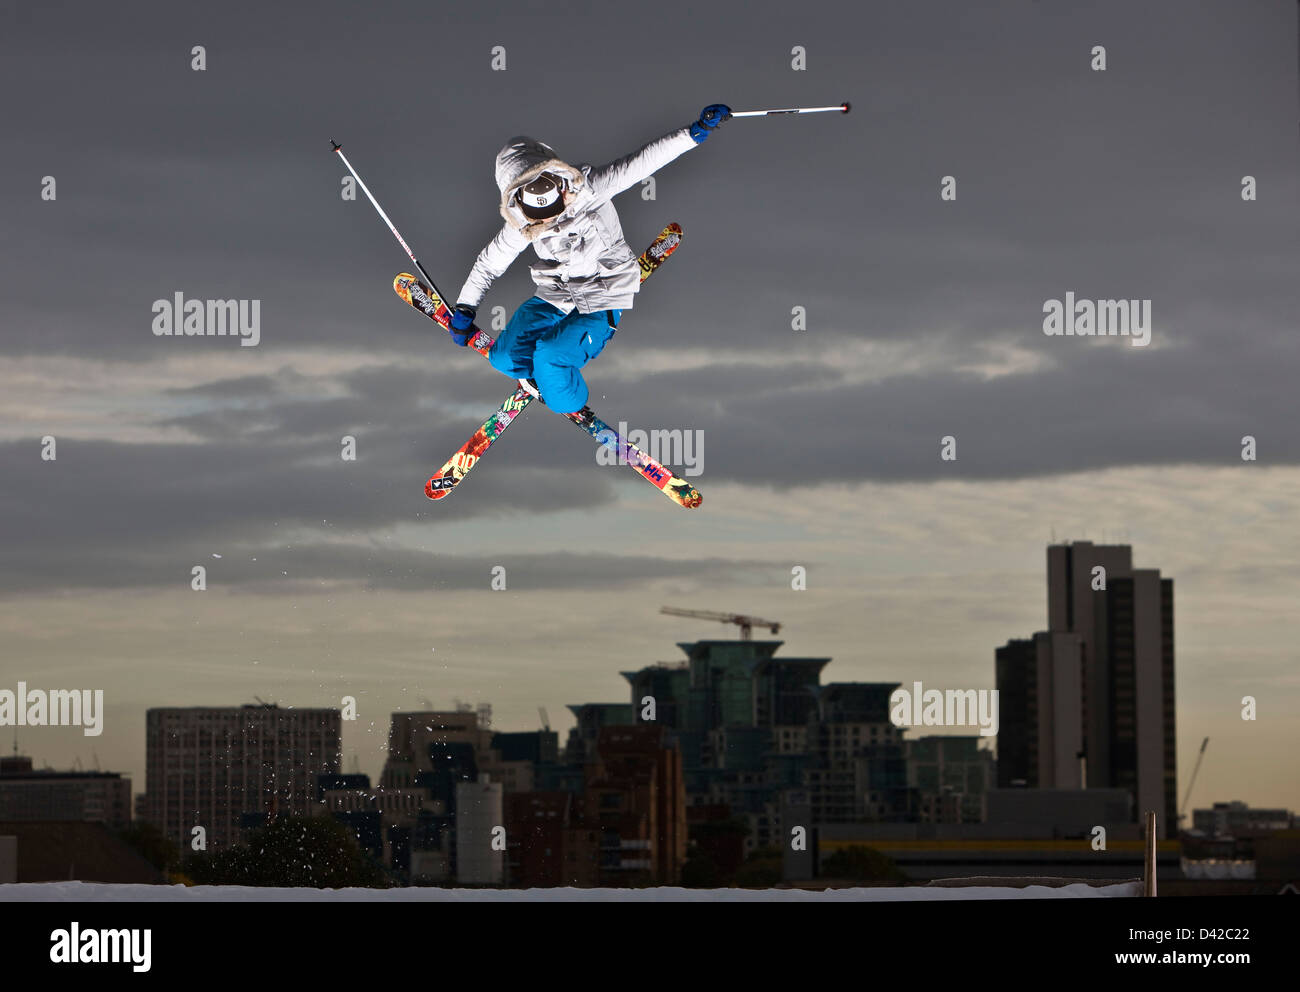 Urban skiing mid air action jump, skis crossed Stock Photo